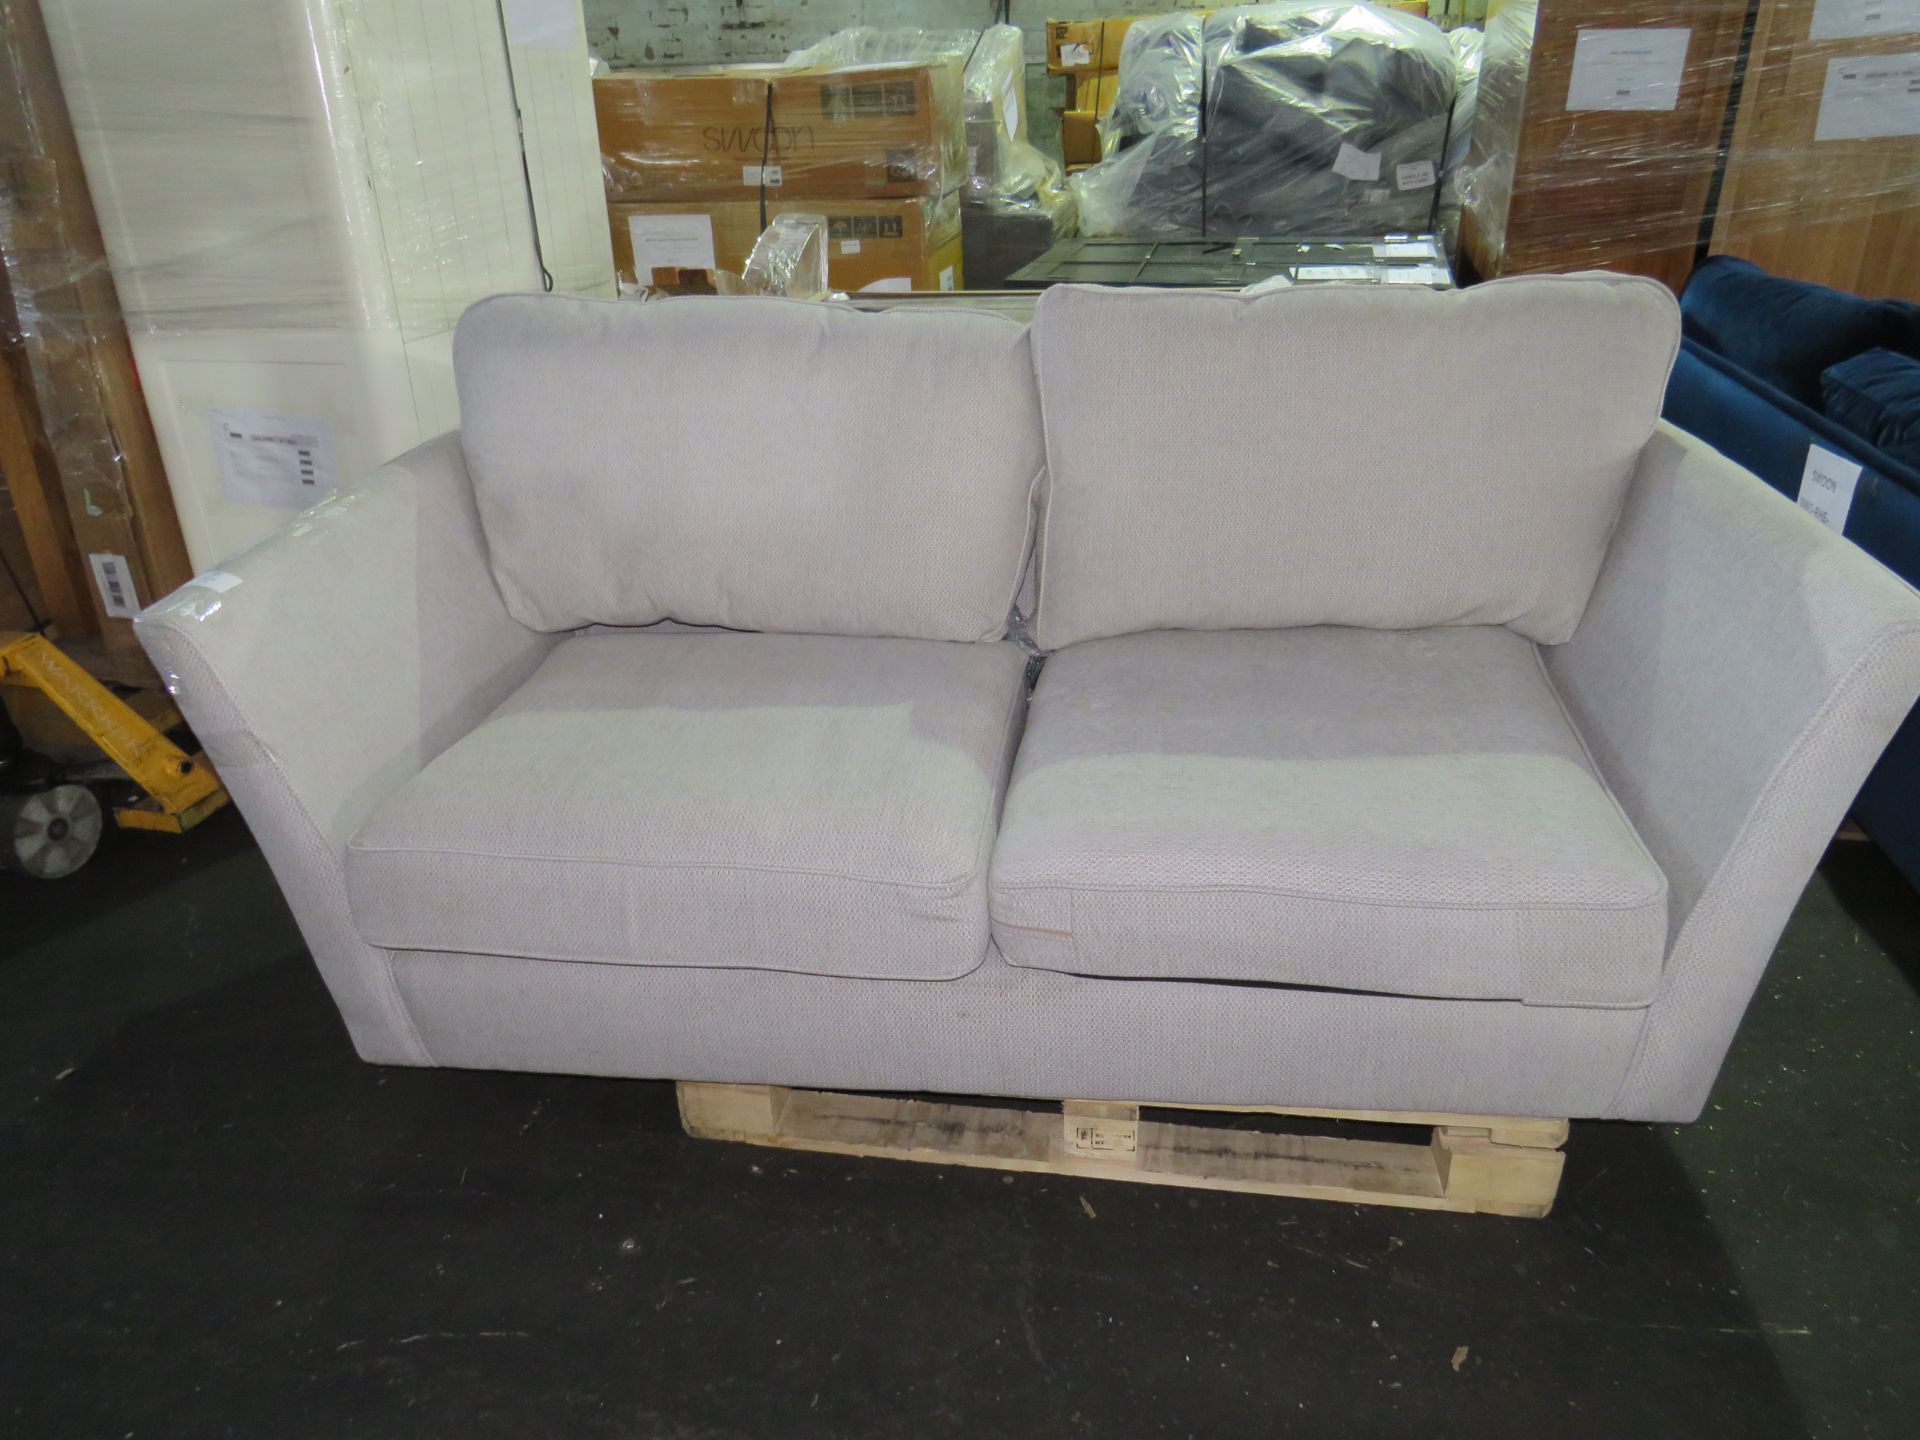 Oak Furnitureland Gainsborough 3 Seater Sofa in Minerva Silver with Slate Scatters RRP œ1149.99 - Image 2 of 3